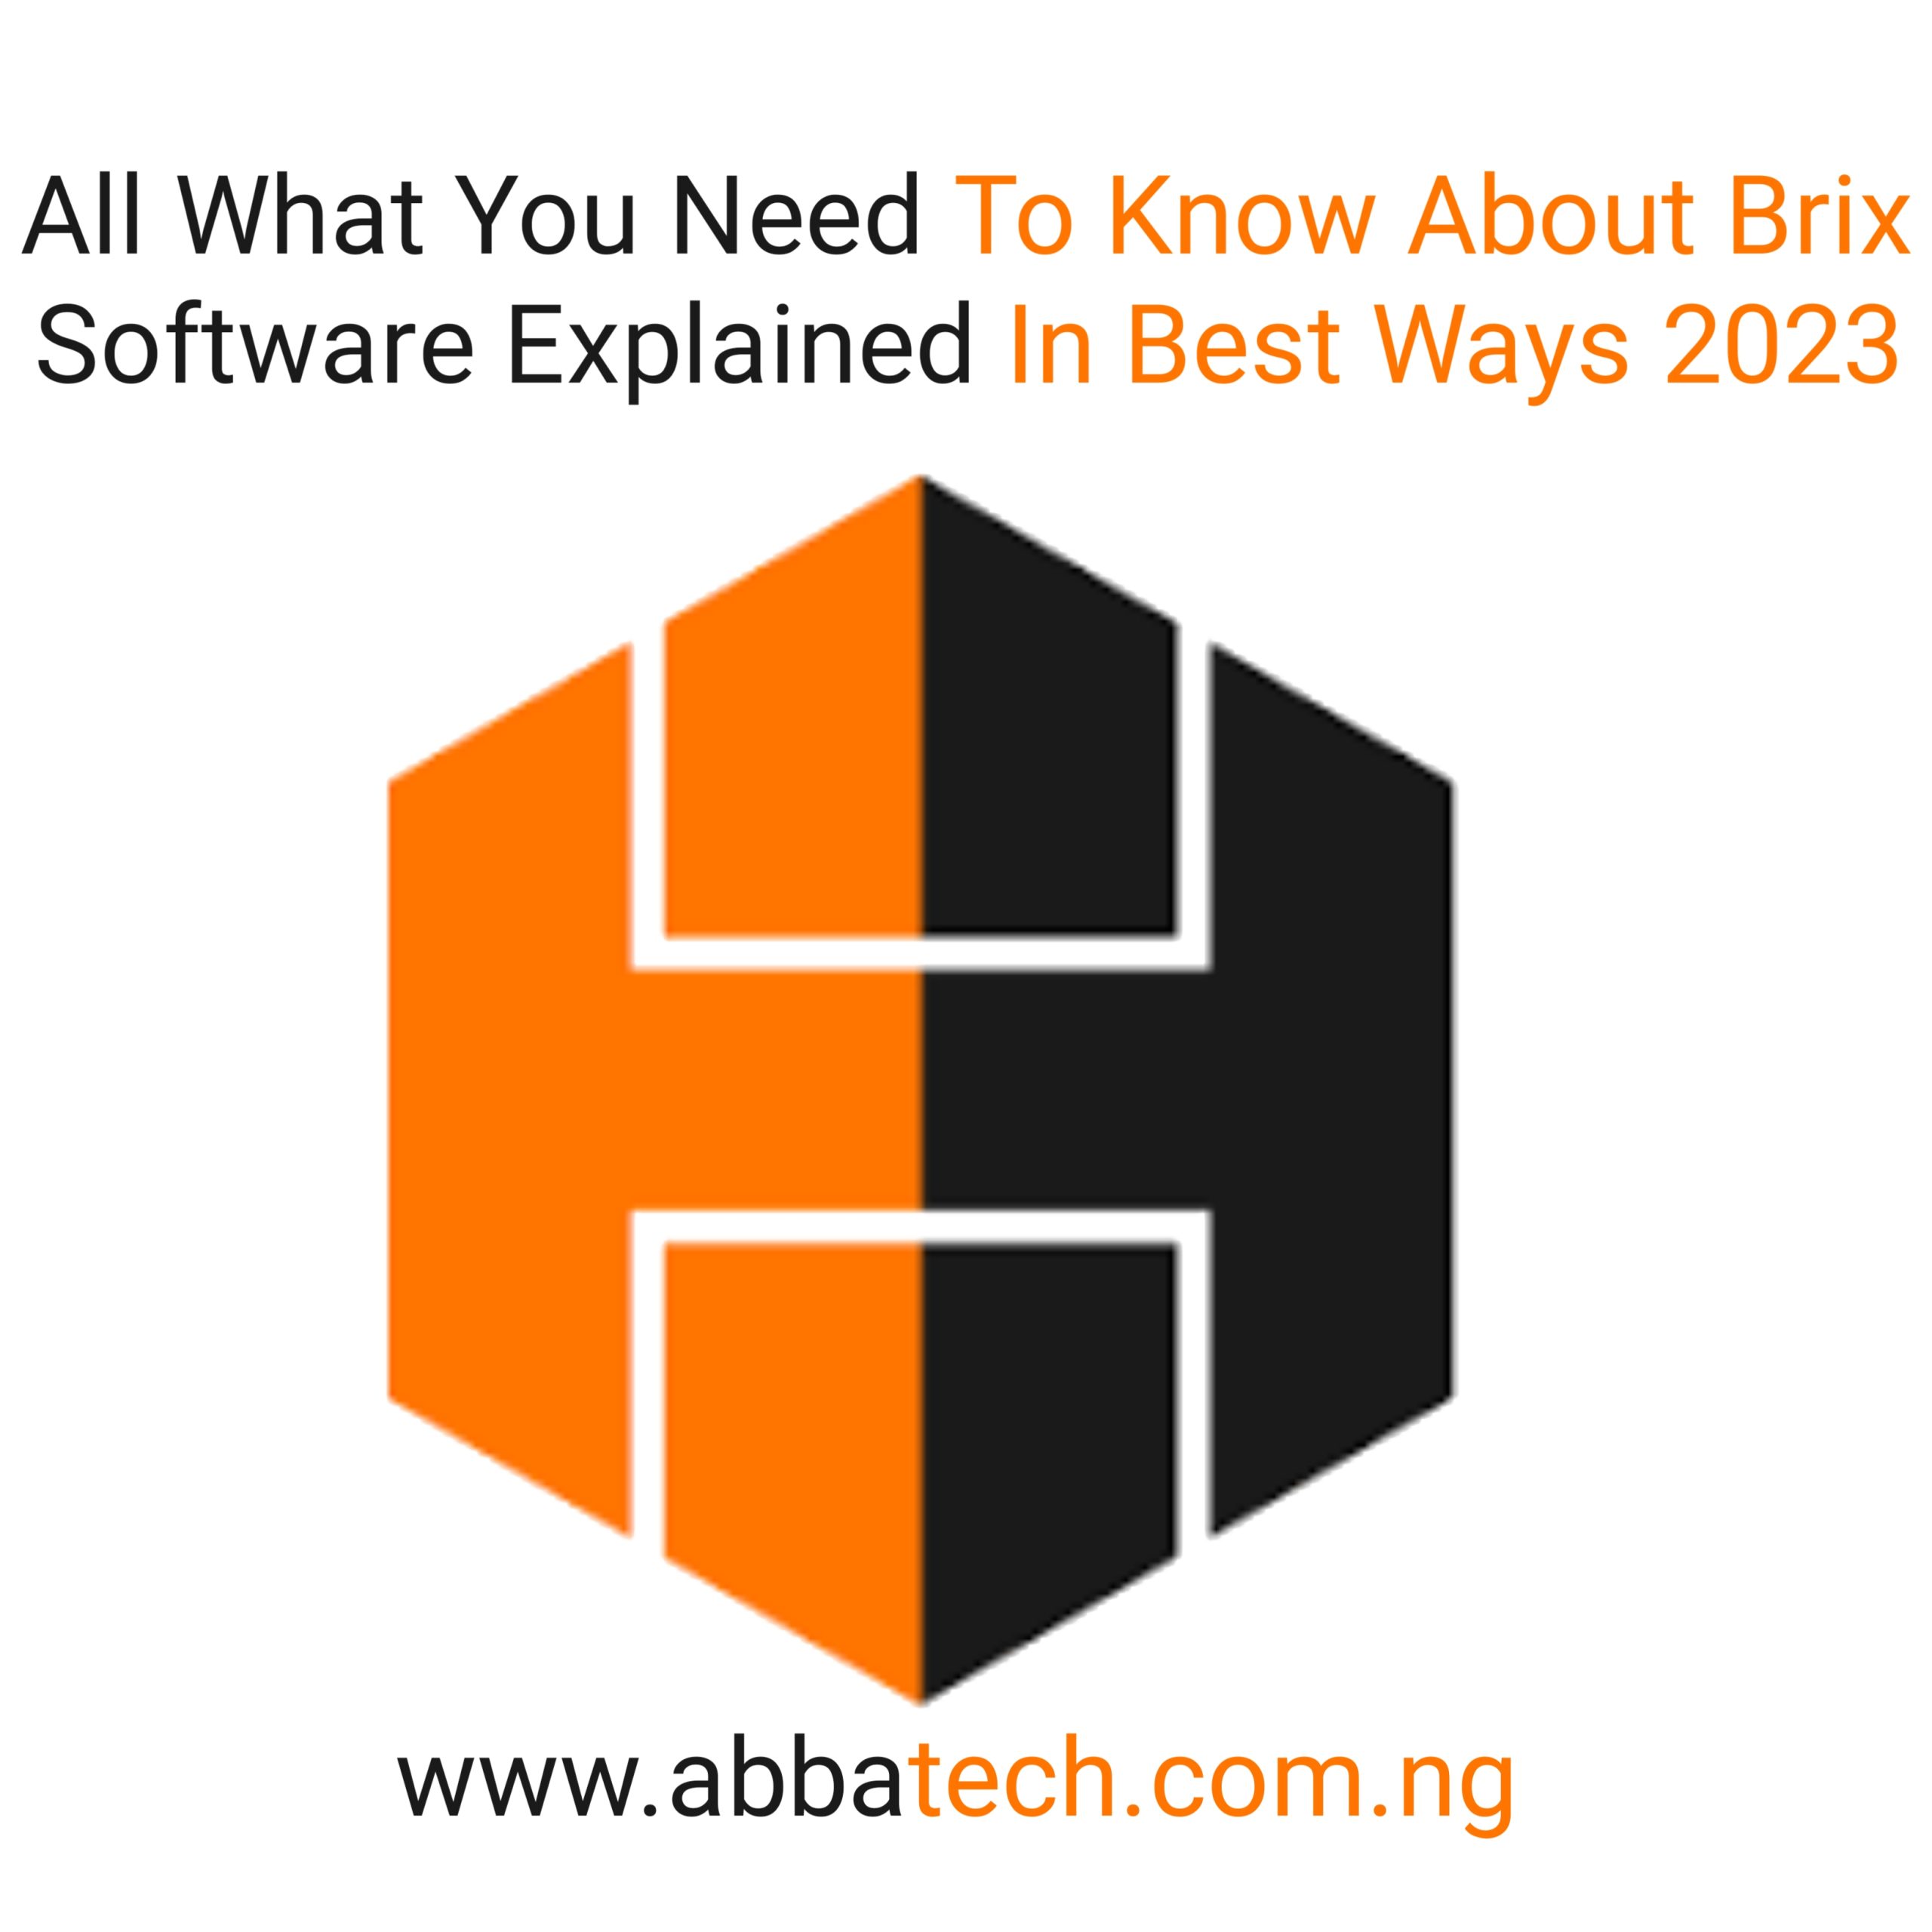 All What You Need To Know About Brix Software Explained In Best Ways 2023